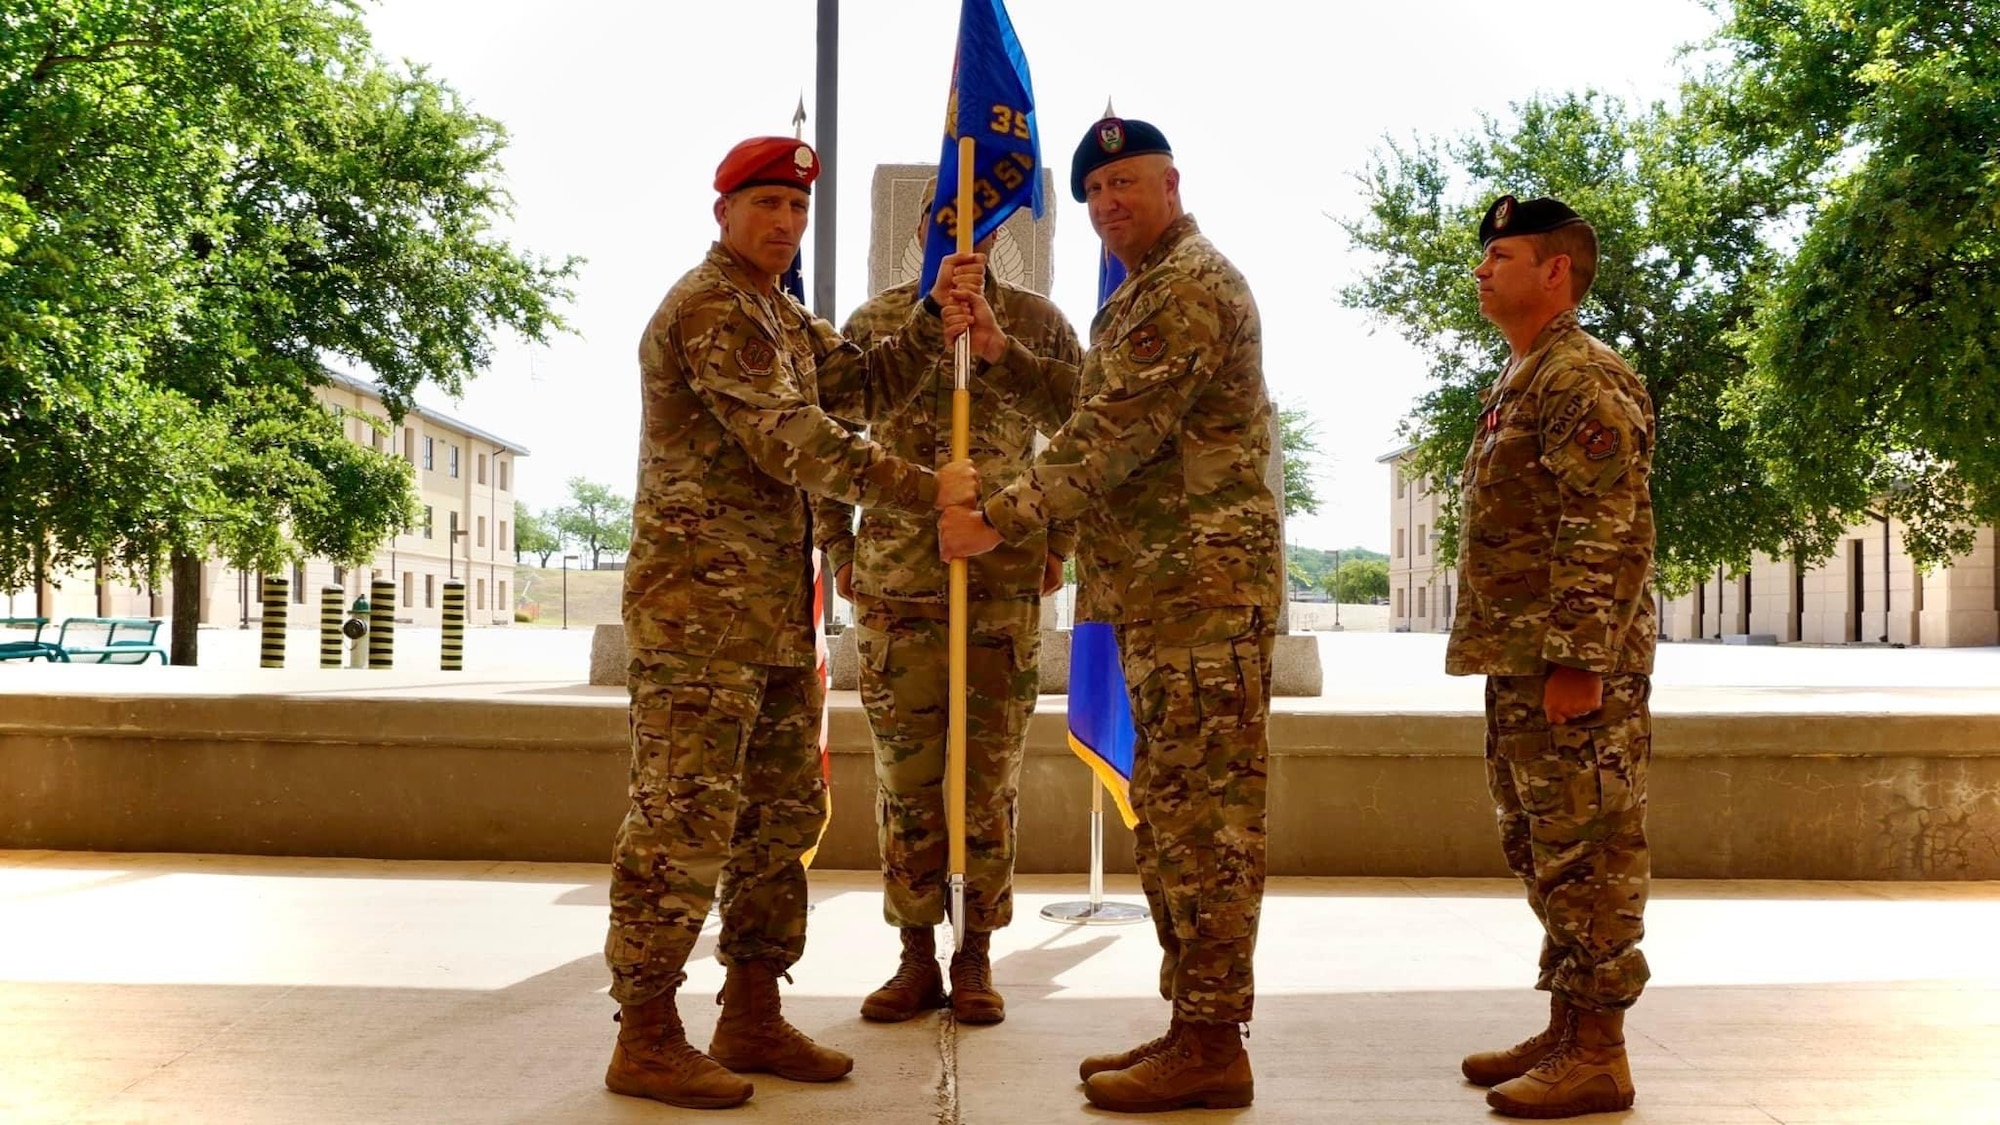 U.S. Air Force Col. Mason Dula (left), Special Warfare Training Wing commander and presiding officer, passes the guidon to Lt. Col. Christopher Deaver, incoming 353rd Special Warfare Training Squadron commander, during the 353rd SWTS change of command ceremony at Joint Base San Antonio-Chapman Training Annex, Texas, June 3, 2022. At right is Lt. Col. Matthew McMurtry, outgoing 353rd SWTS commander.